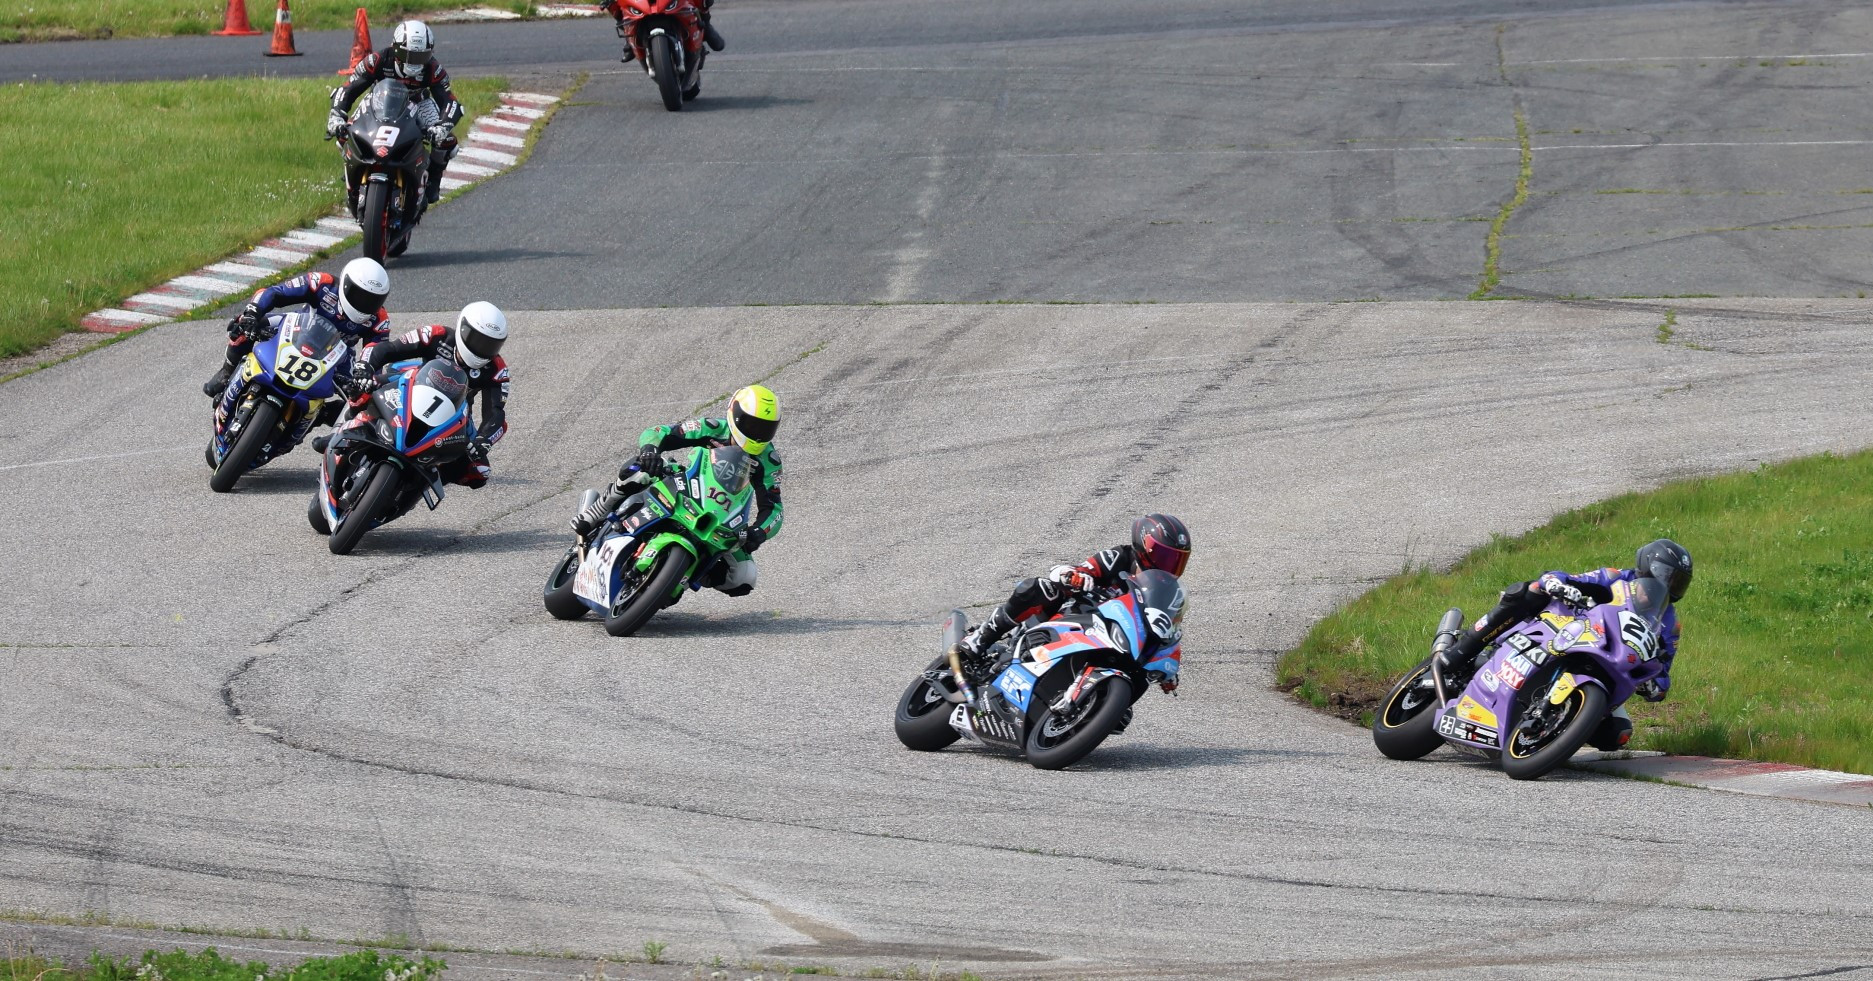 First lap Superbike action from Race Two Sunday at SMP with race winner Alex Dumas (23) leading over Sam Guerin (2), Jordan Szoke (101), Ben Young (1), Tomas Casas (18), Trevor Daley (9), and the rest. Photo by Rob O'Brien, courtesy CSBK.